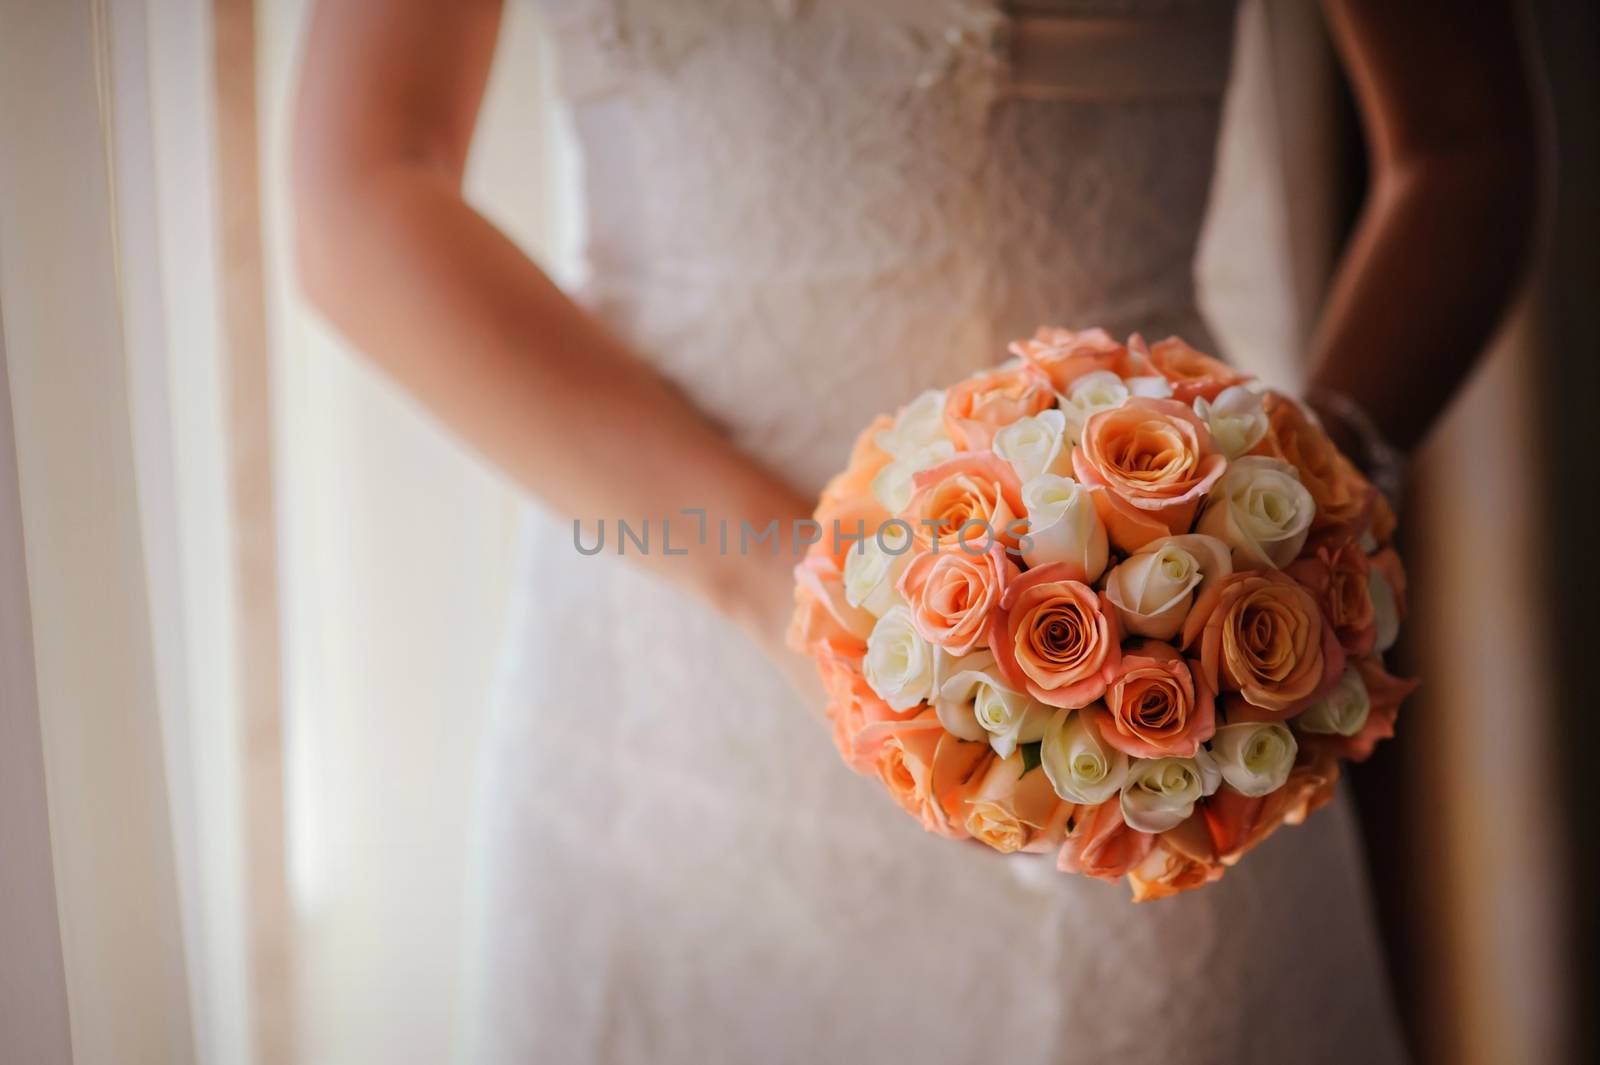 bride holding a wedding bouquet with white and pink roses by timonko